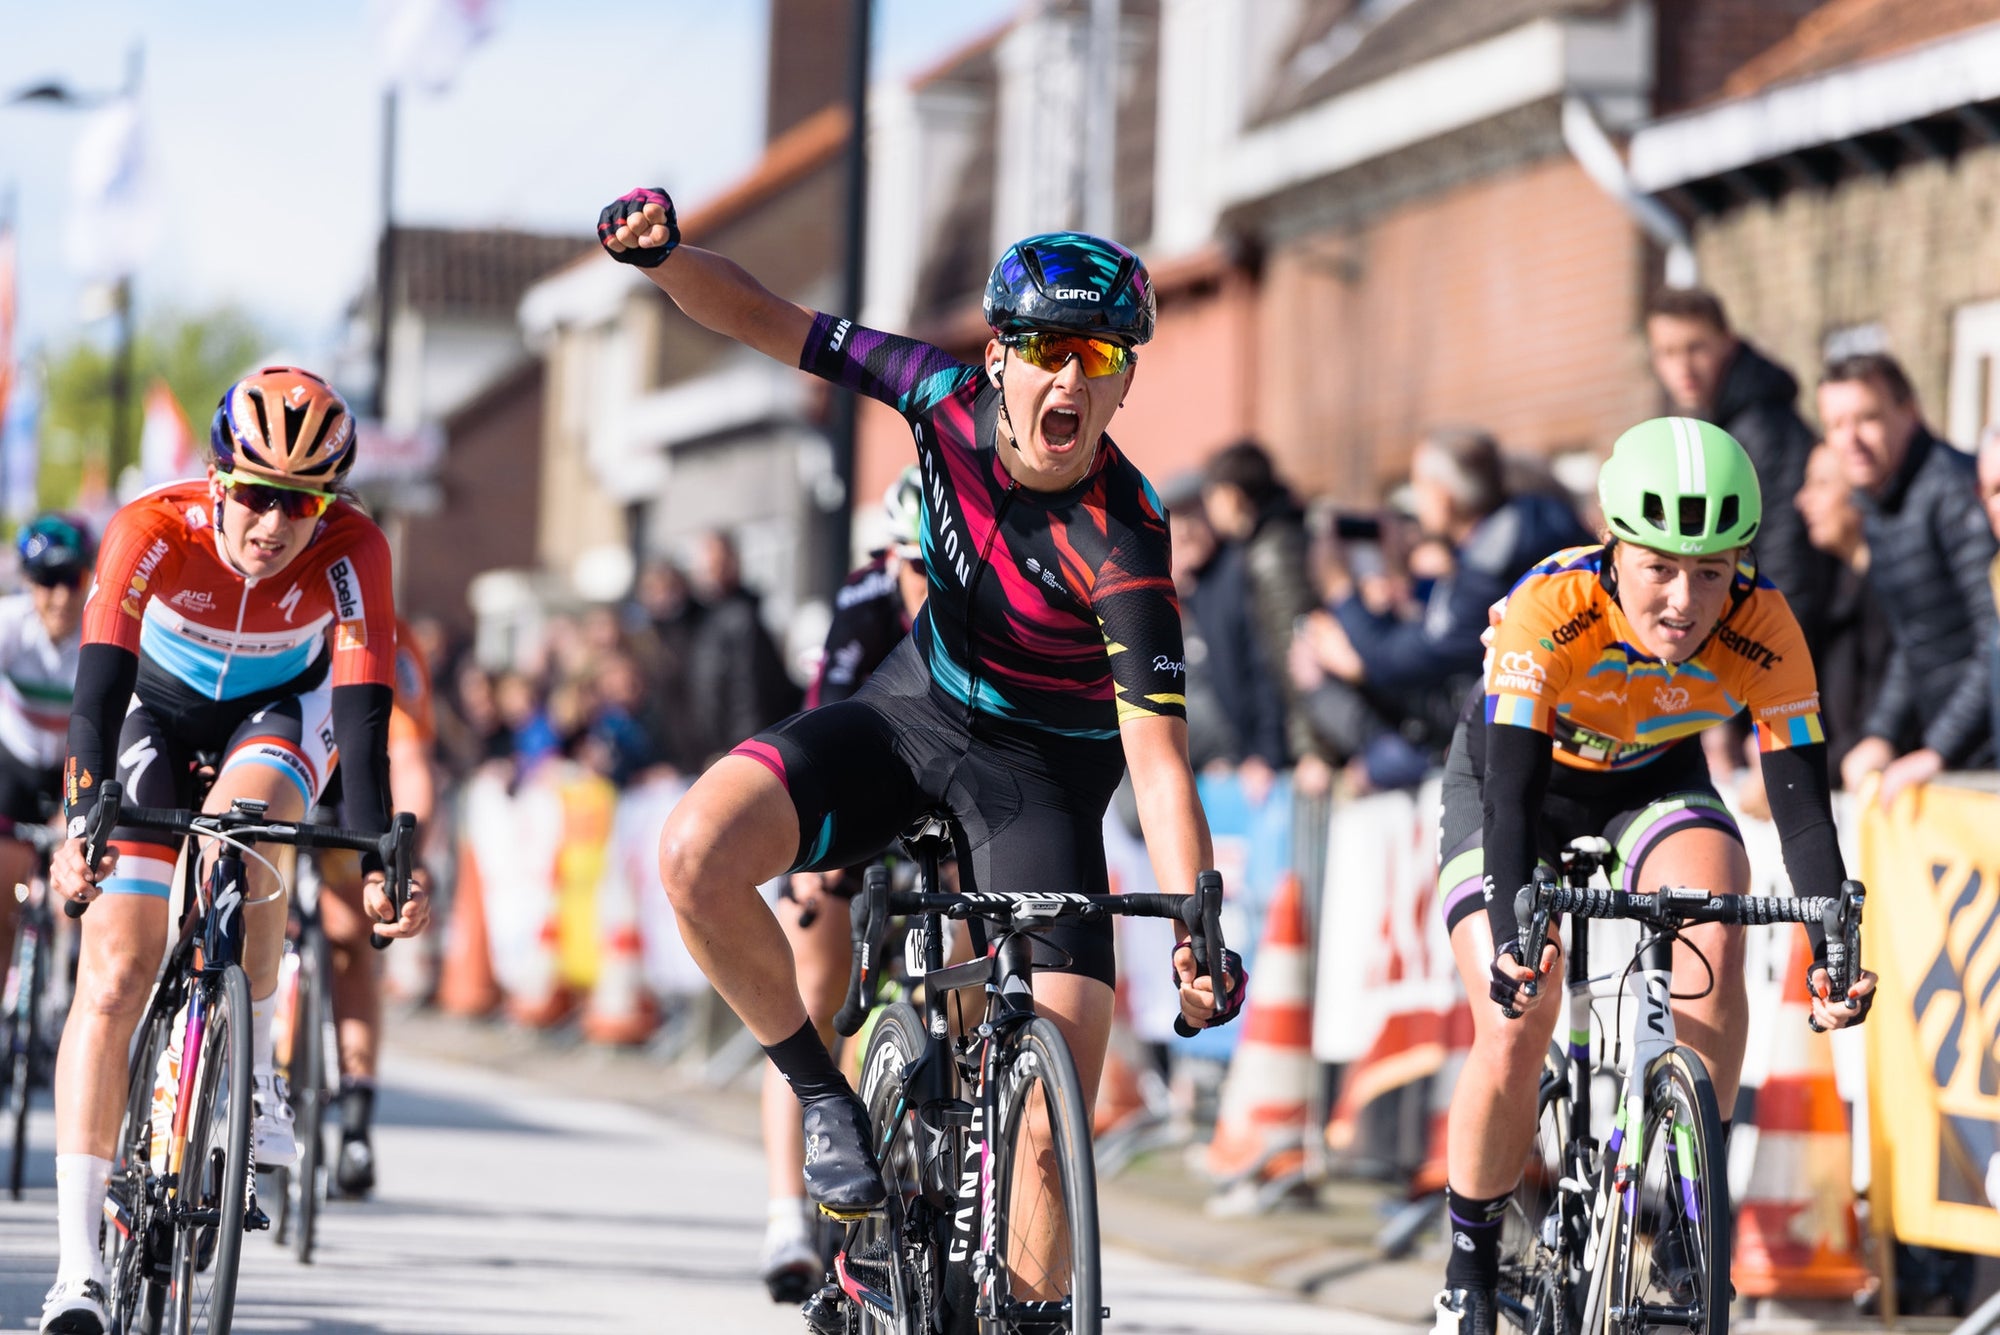 CANYON//SRAM Racing: Amialiusik looks for a podium and Guarischi looks for Doha selection